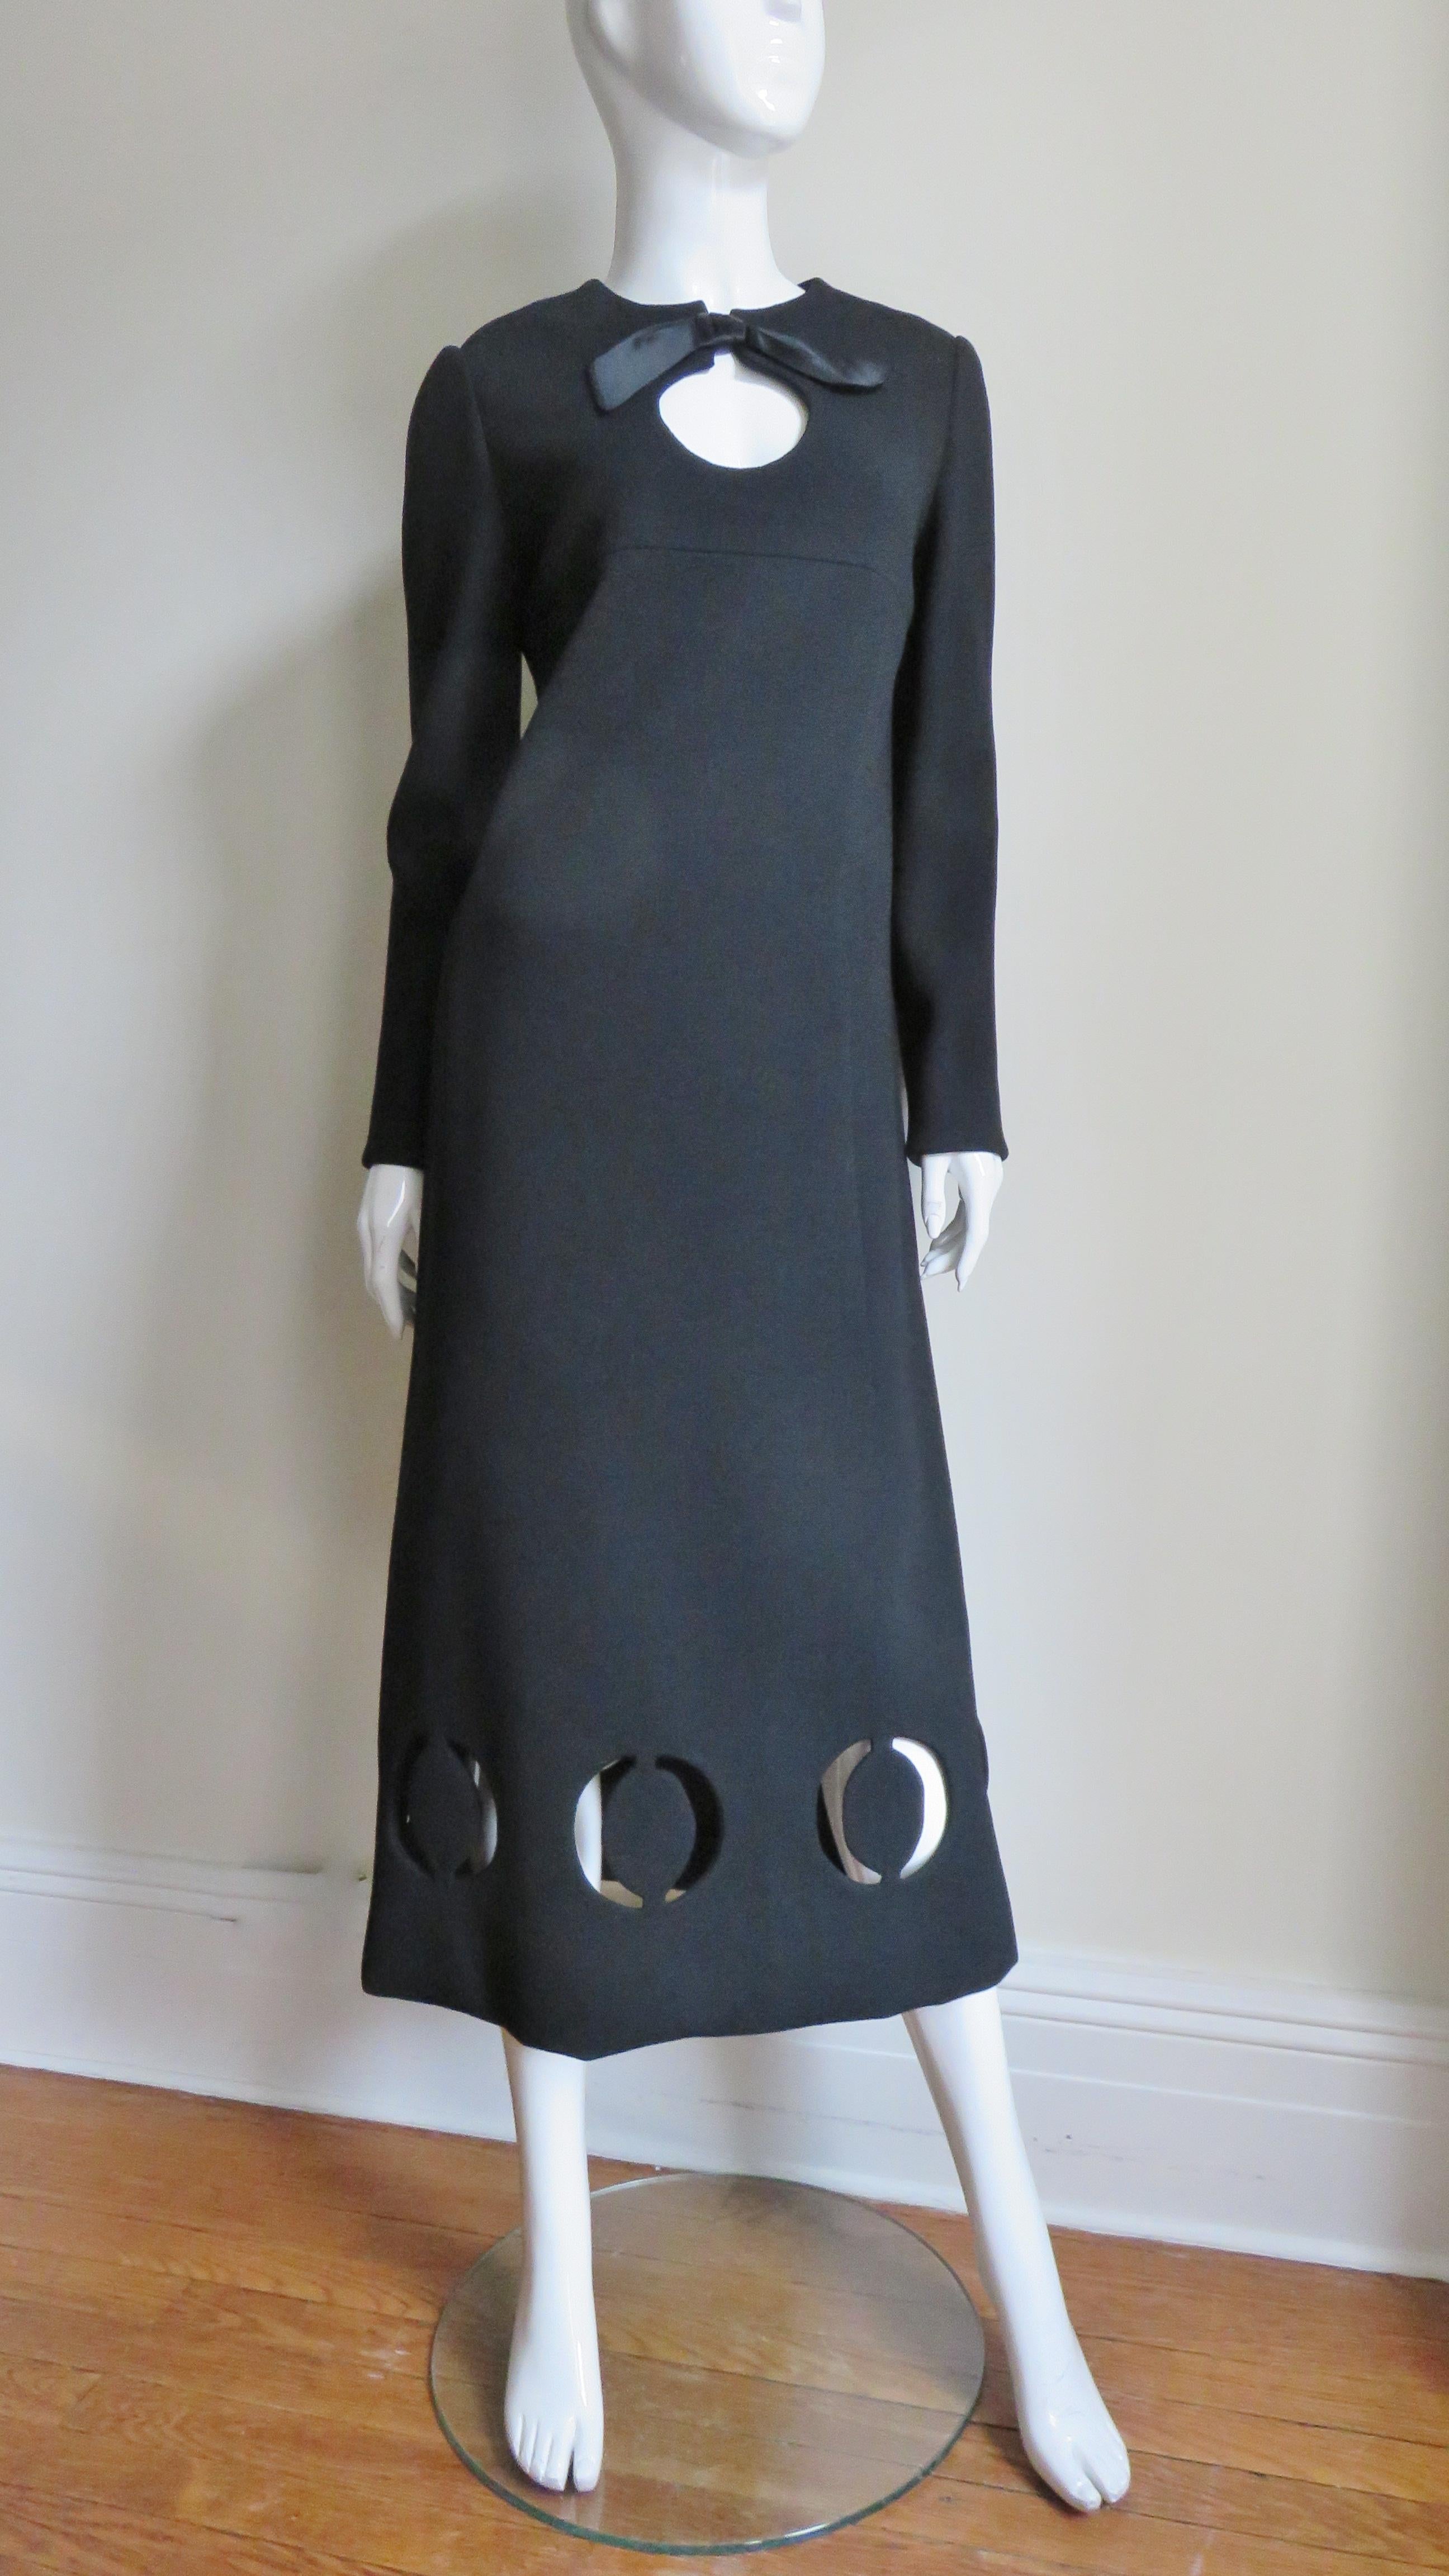 A fabulous black wool midi dress from Pierre Cardin. It has long sleeves, a crew neckline with a silk bow at the top of a front circular cut out. There are front and back yokes and the dress subtly flares towards the hem.  Around the hem